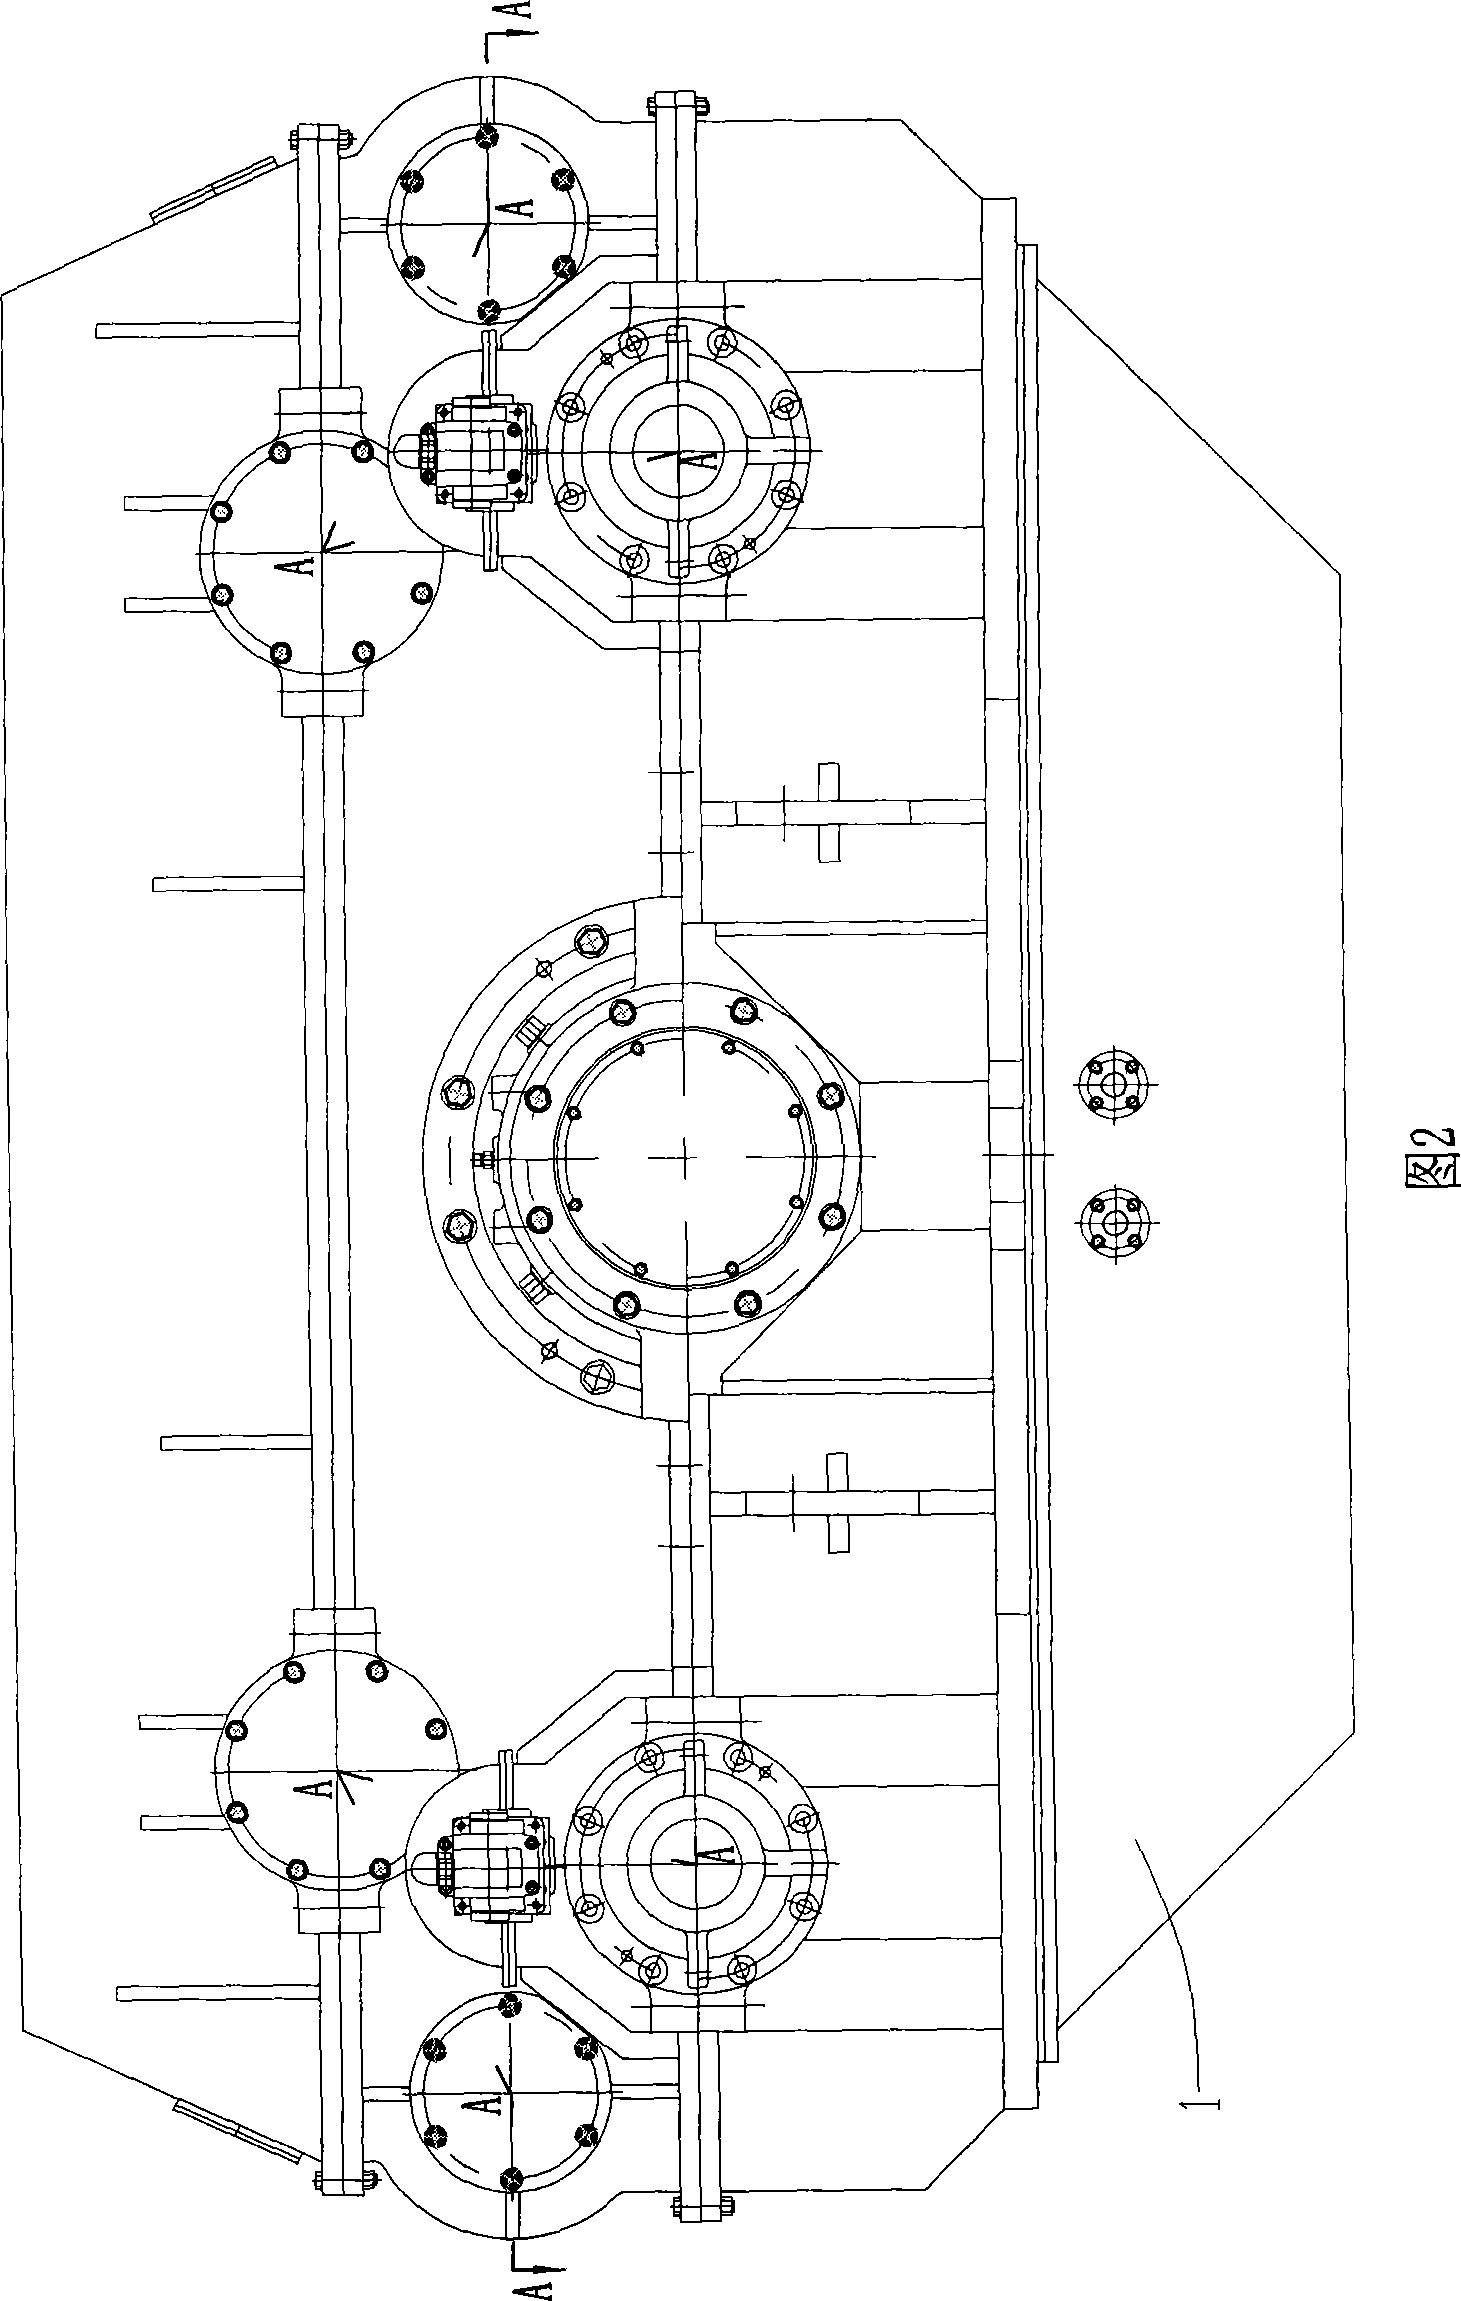 Double-input multi-output parallel operation on-off gearbox used for boats